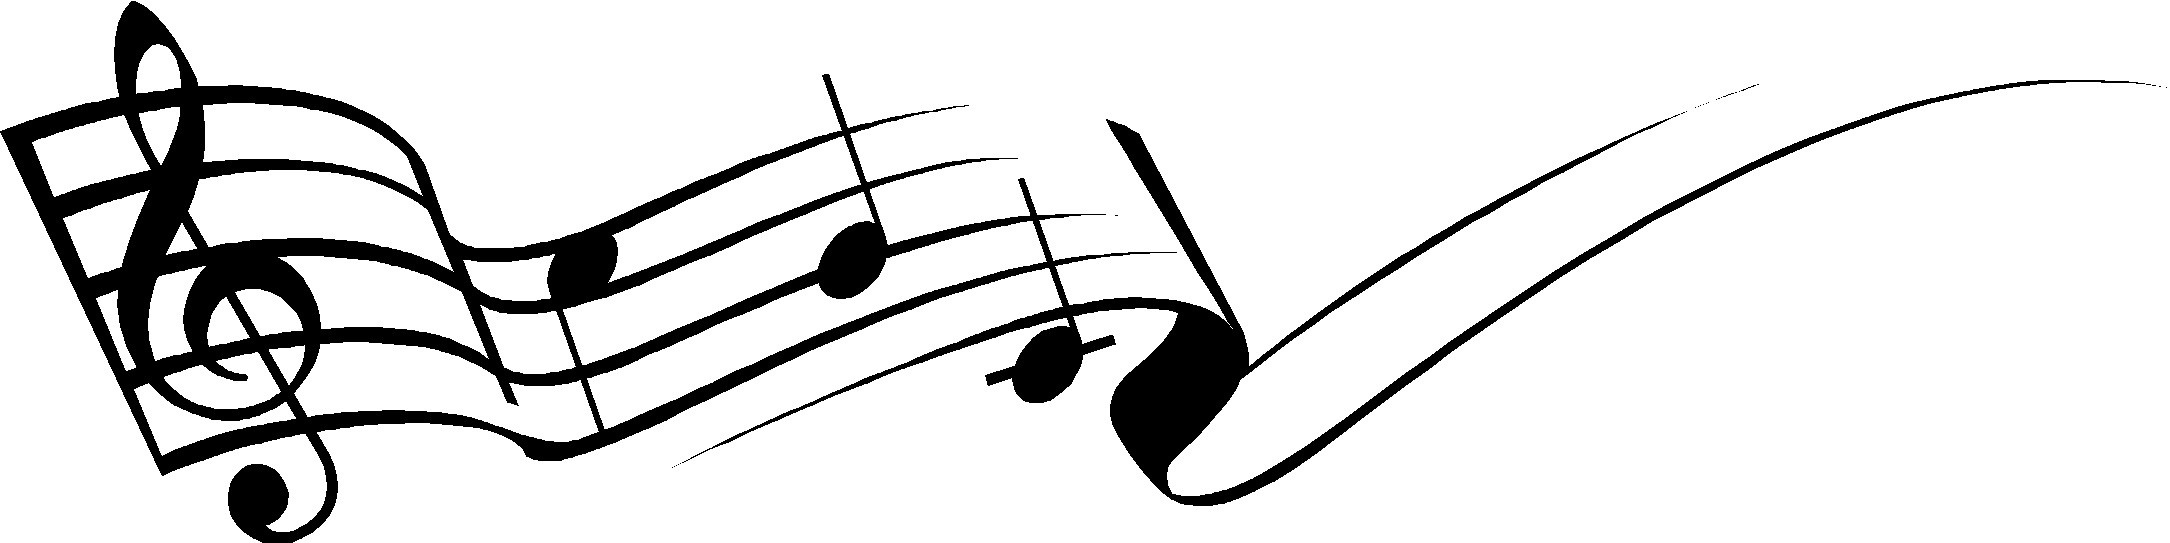 musical-notes-transparent-background-music-notes